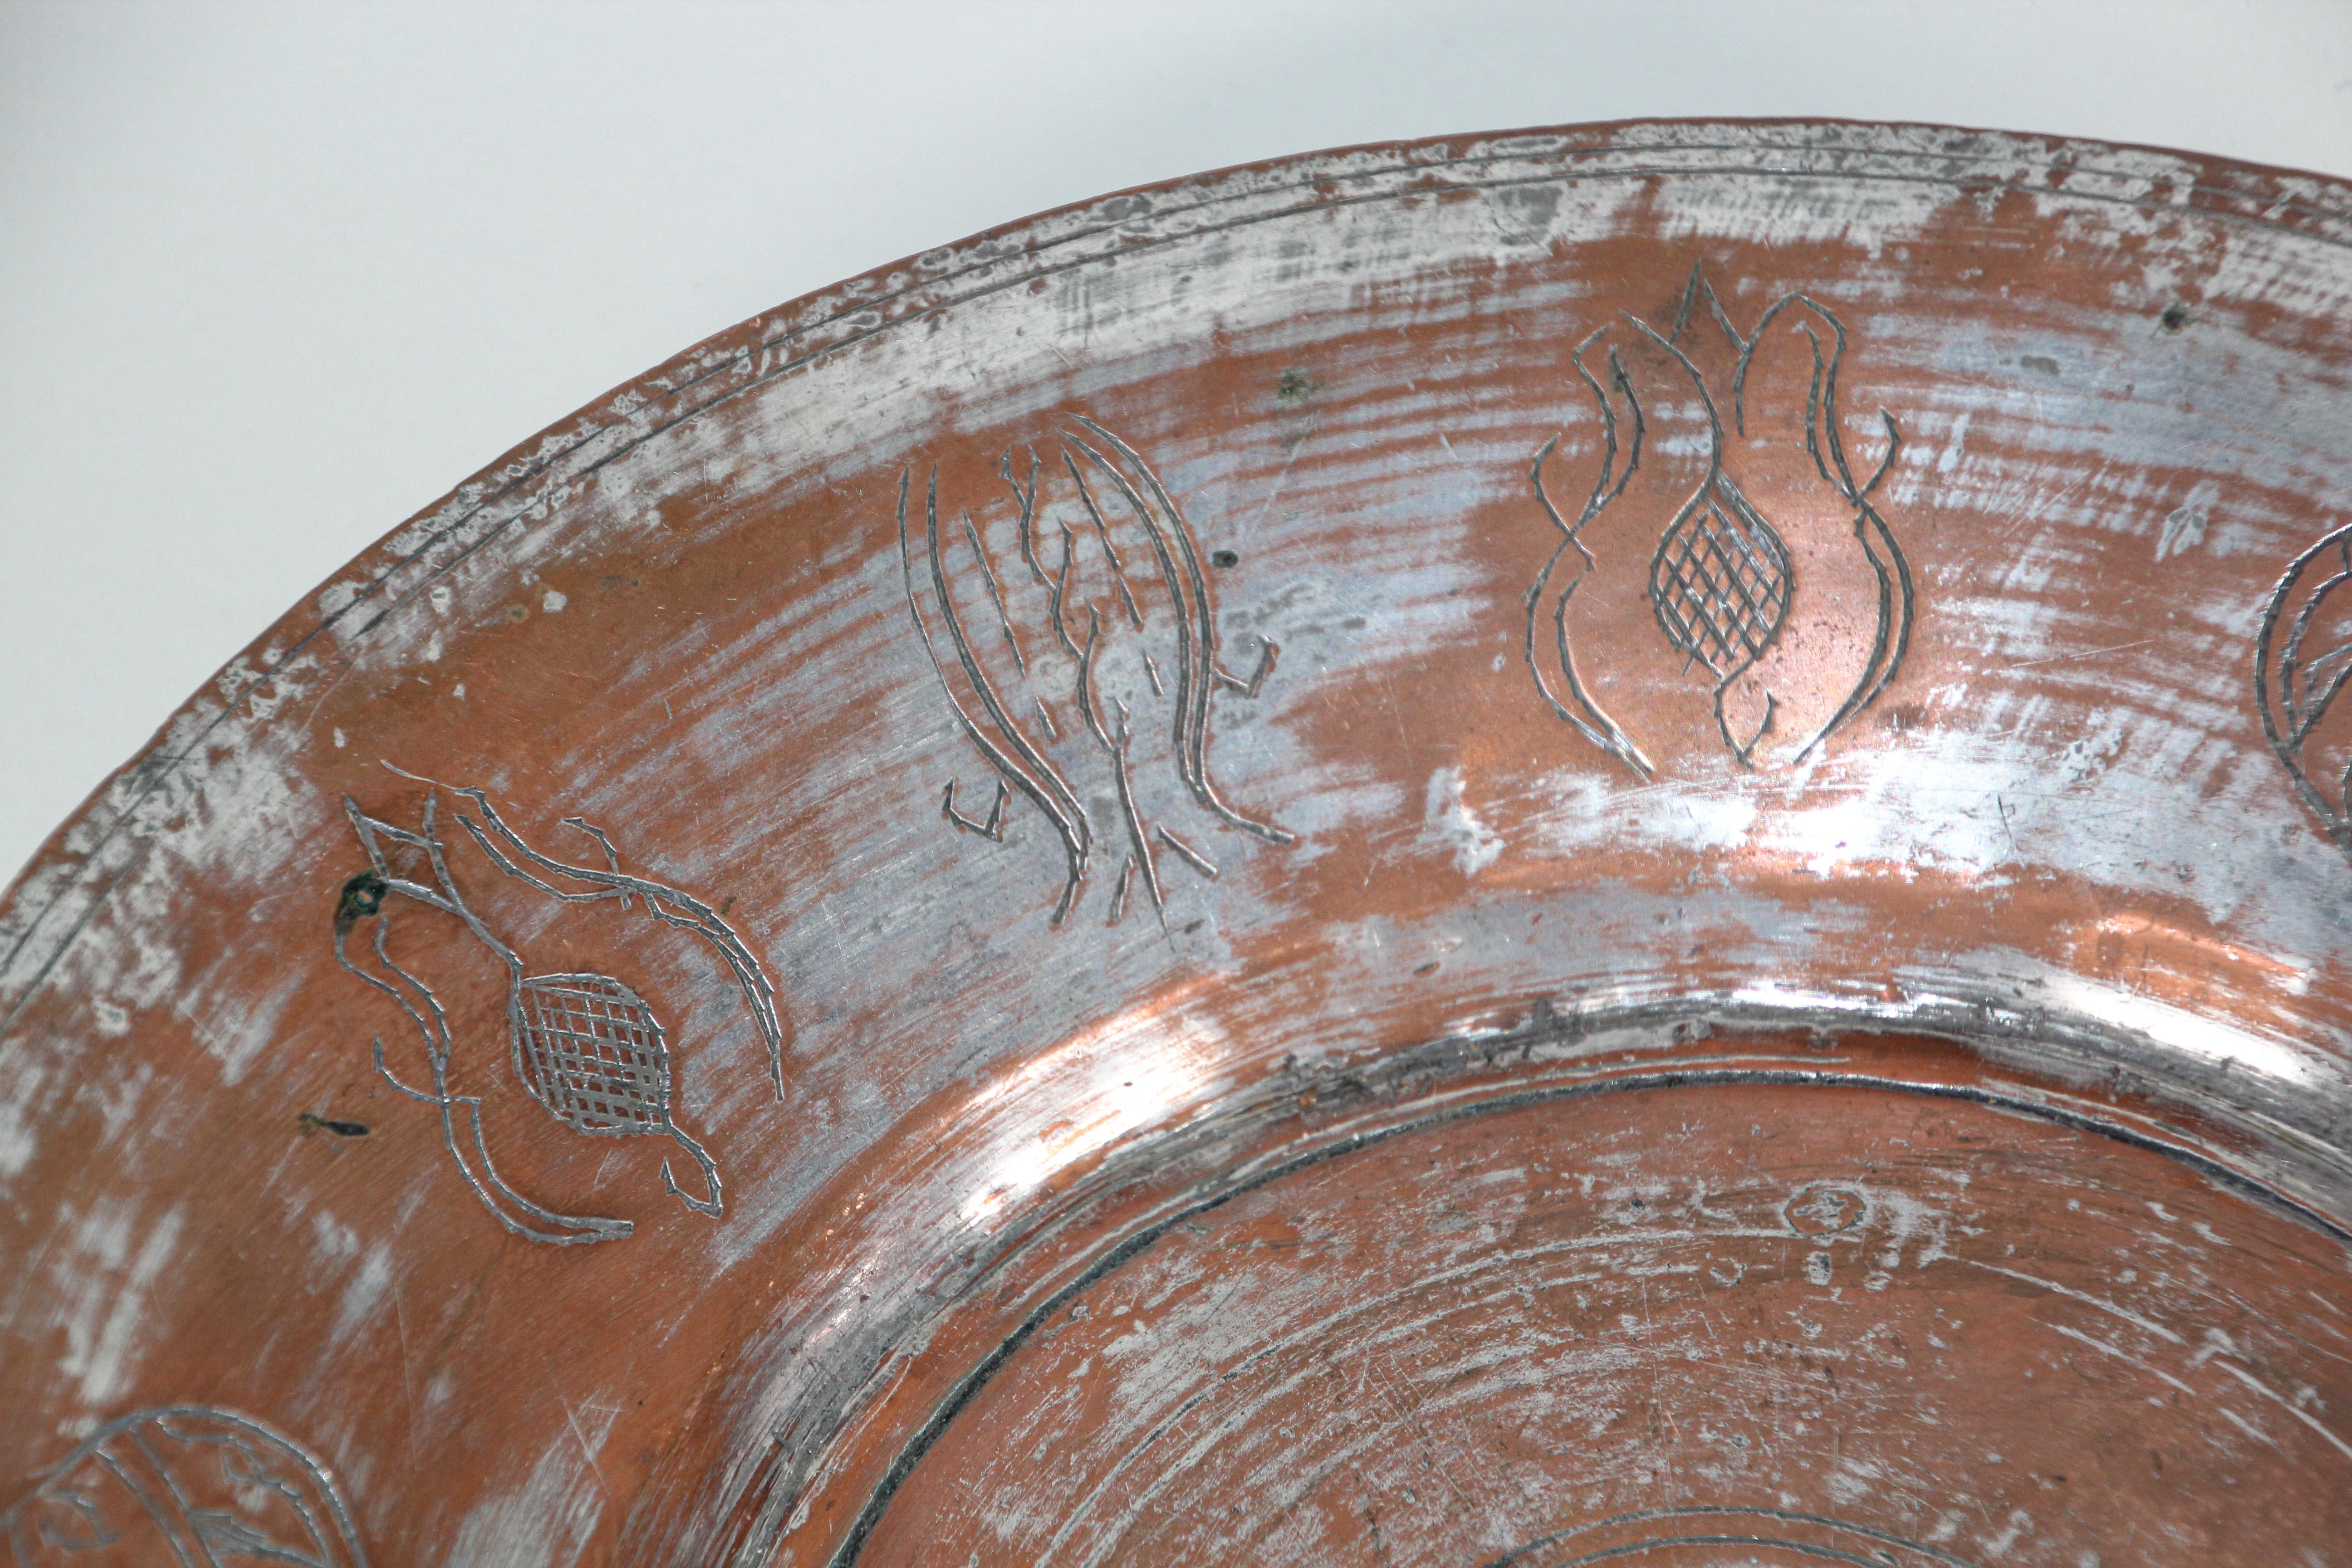 Handcrafted Turkish Ottoman tinned copper metal round vessel.
Middle eastern Asian tinned copper large bowl nicely hand-hammered.
Handcrafted in Turkey.
Maker mark in Arabic in the back.
Measures: 13